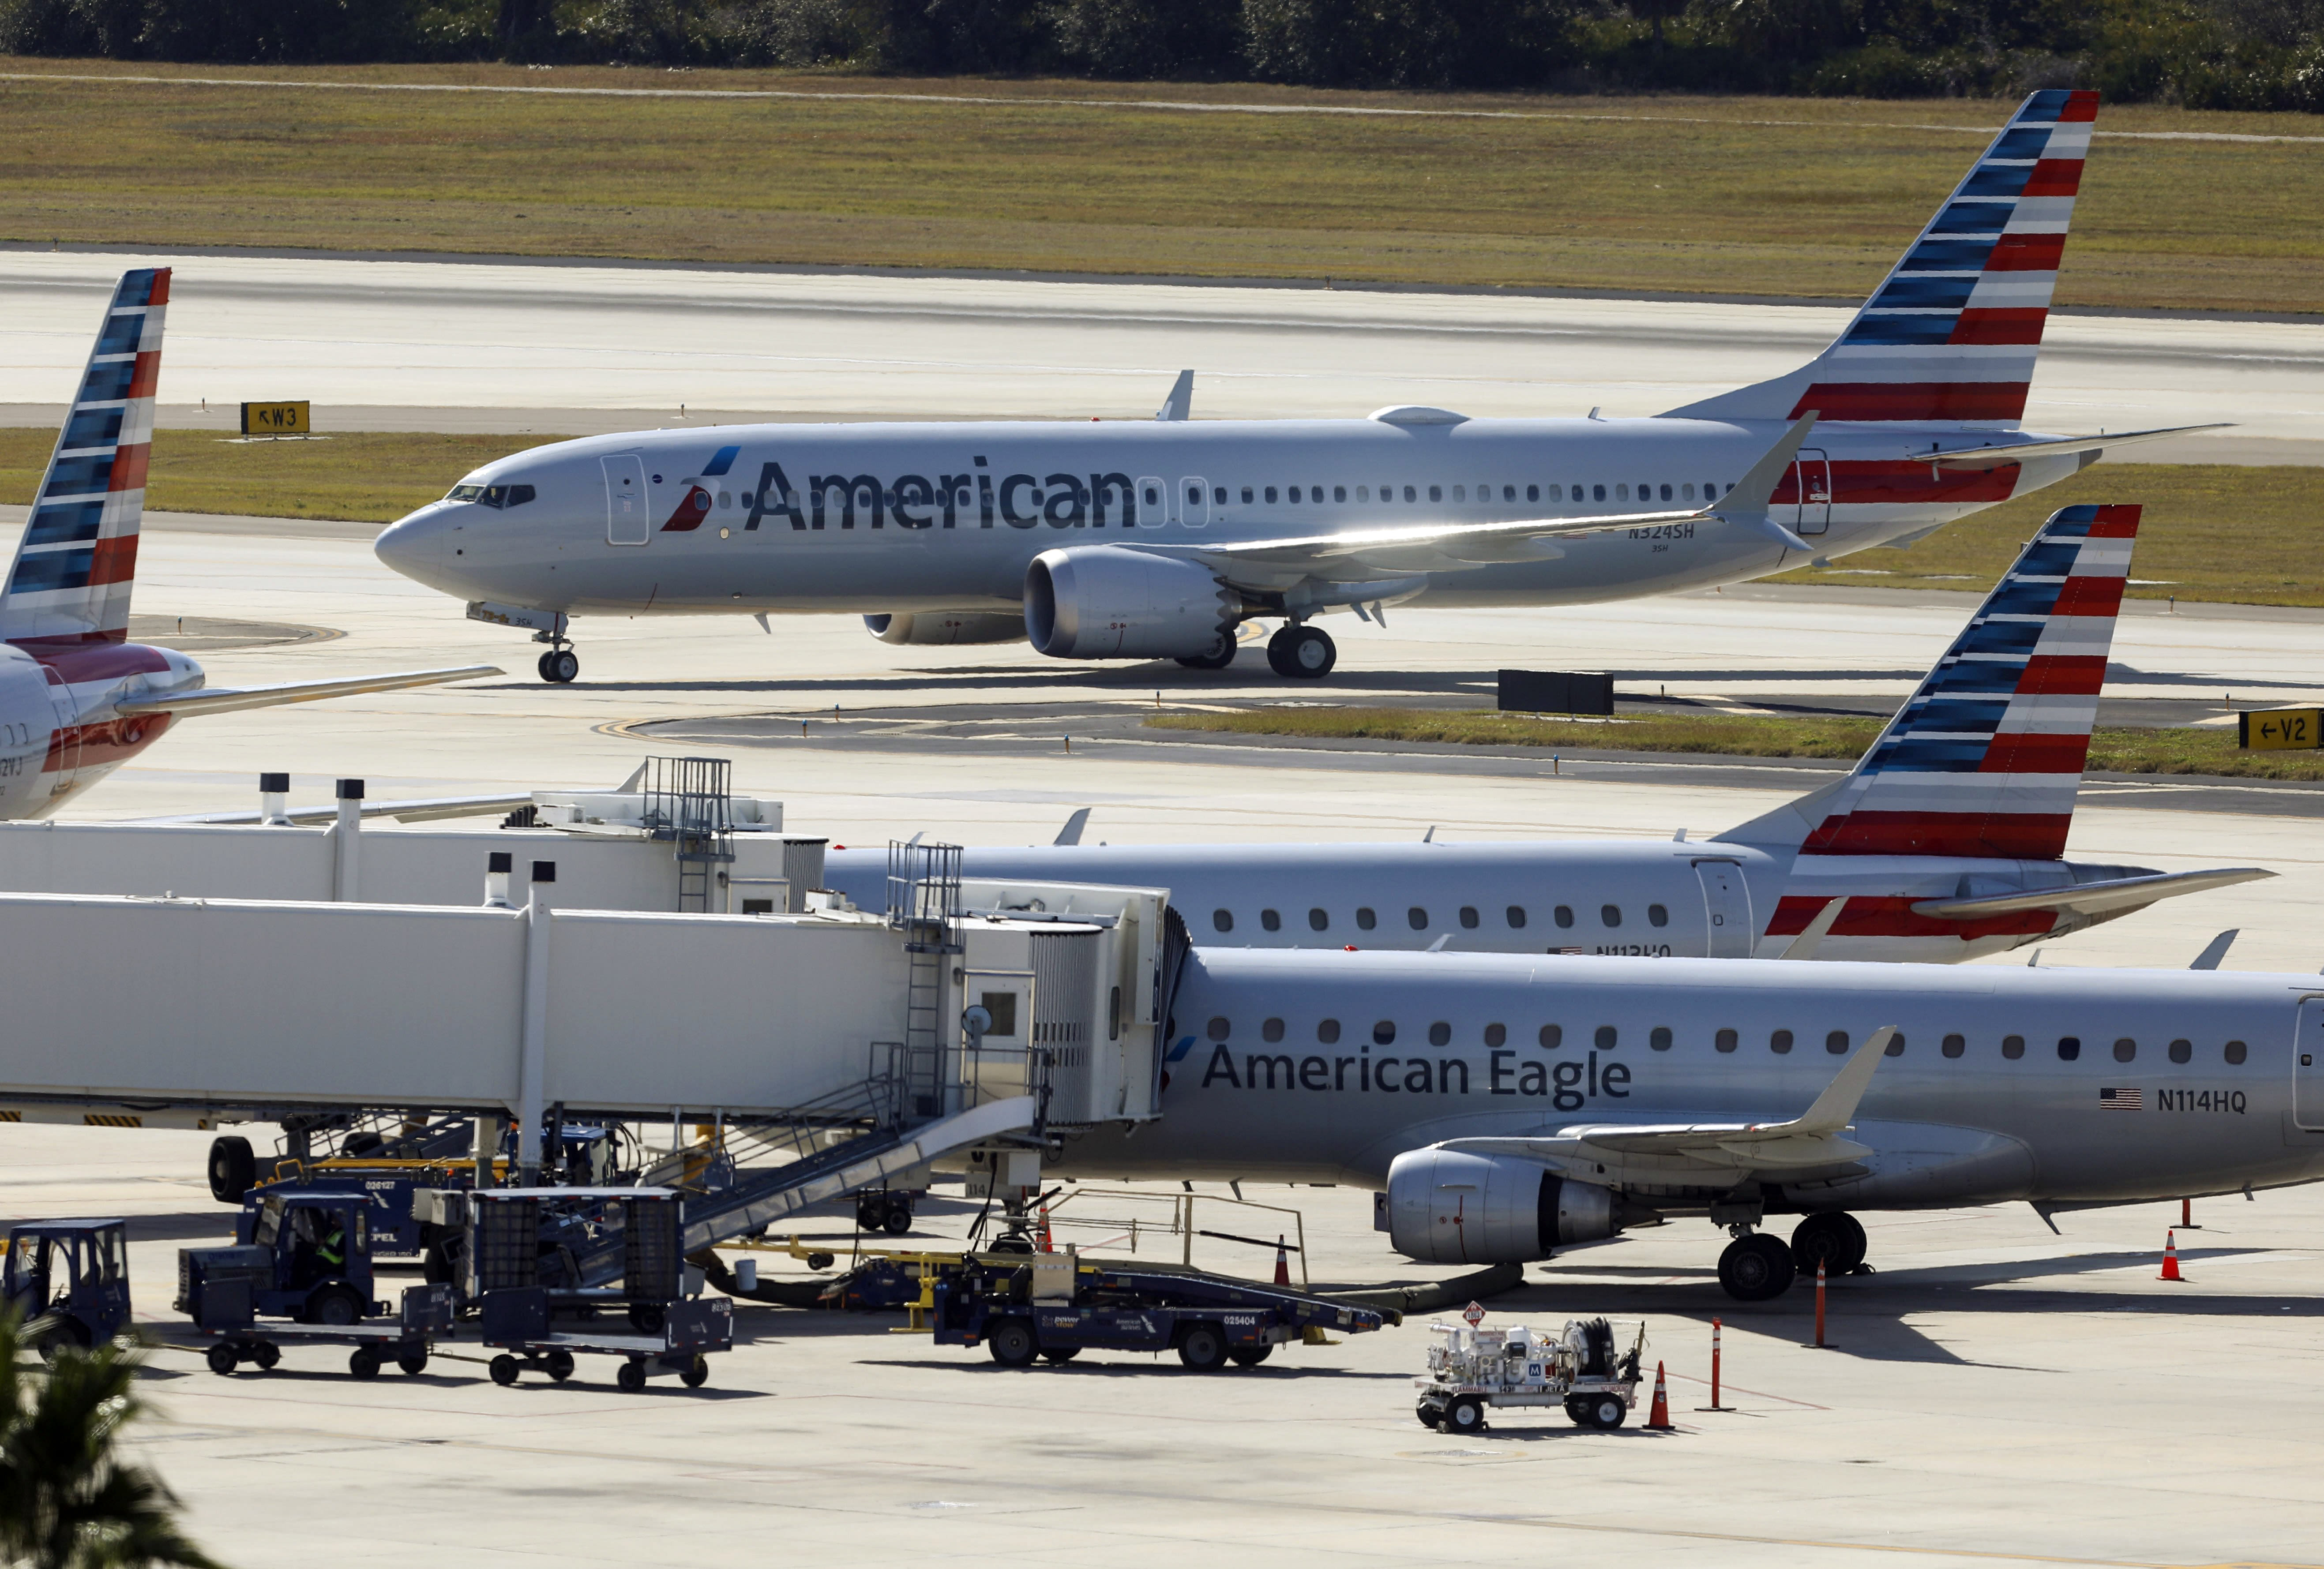 Blown landing-gear tire causes a flight delay at Tampa International Airport; no injuries reported